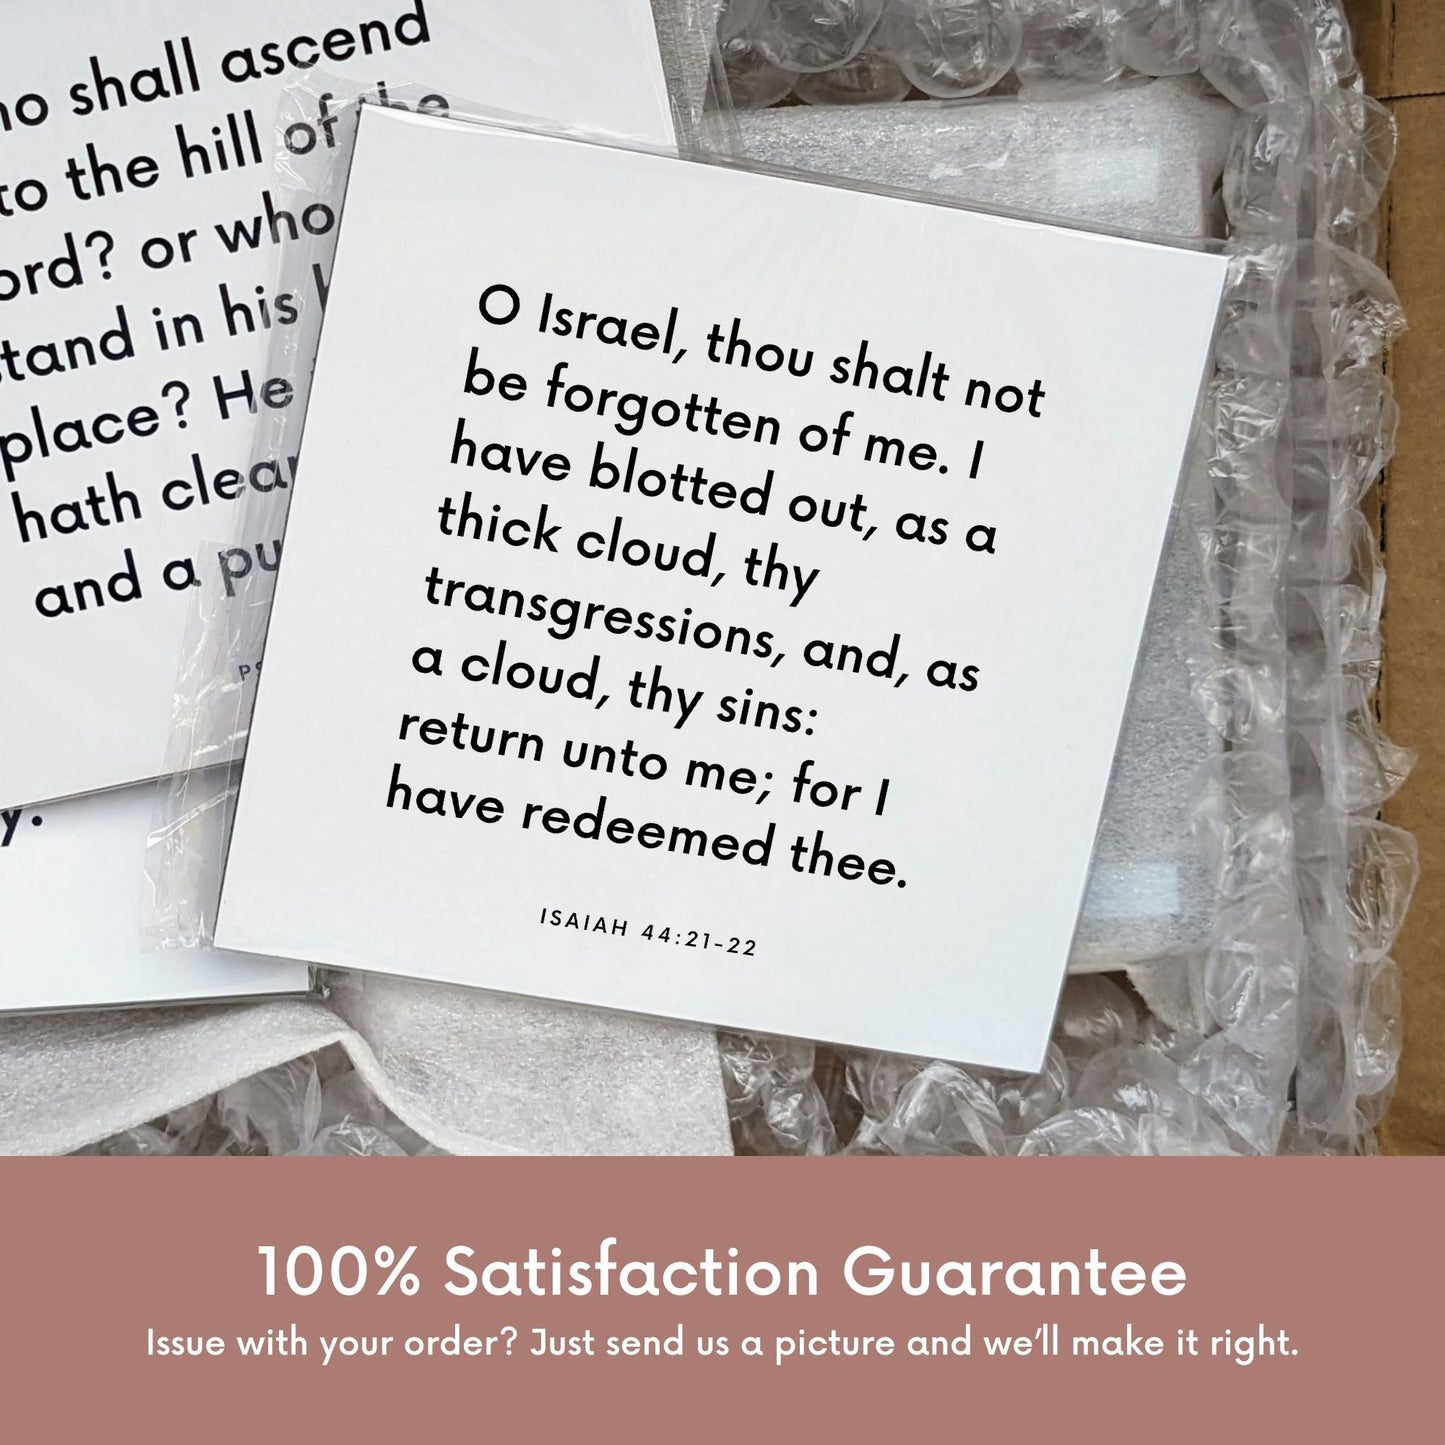 Shipping materials for scripture tile of Isaiah 44:21-22 - "Return unto me, for I have redeemed thee"